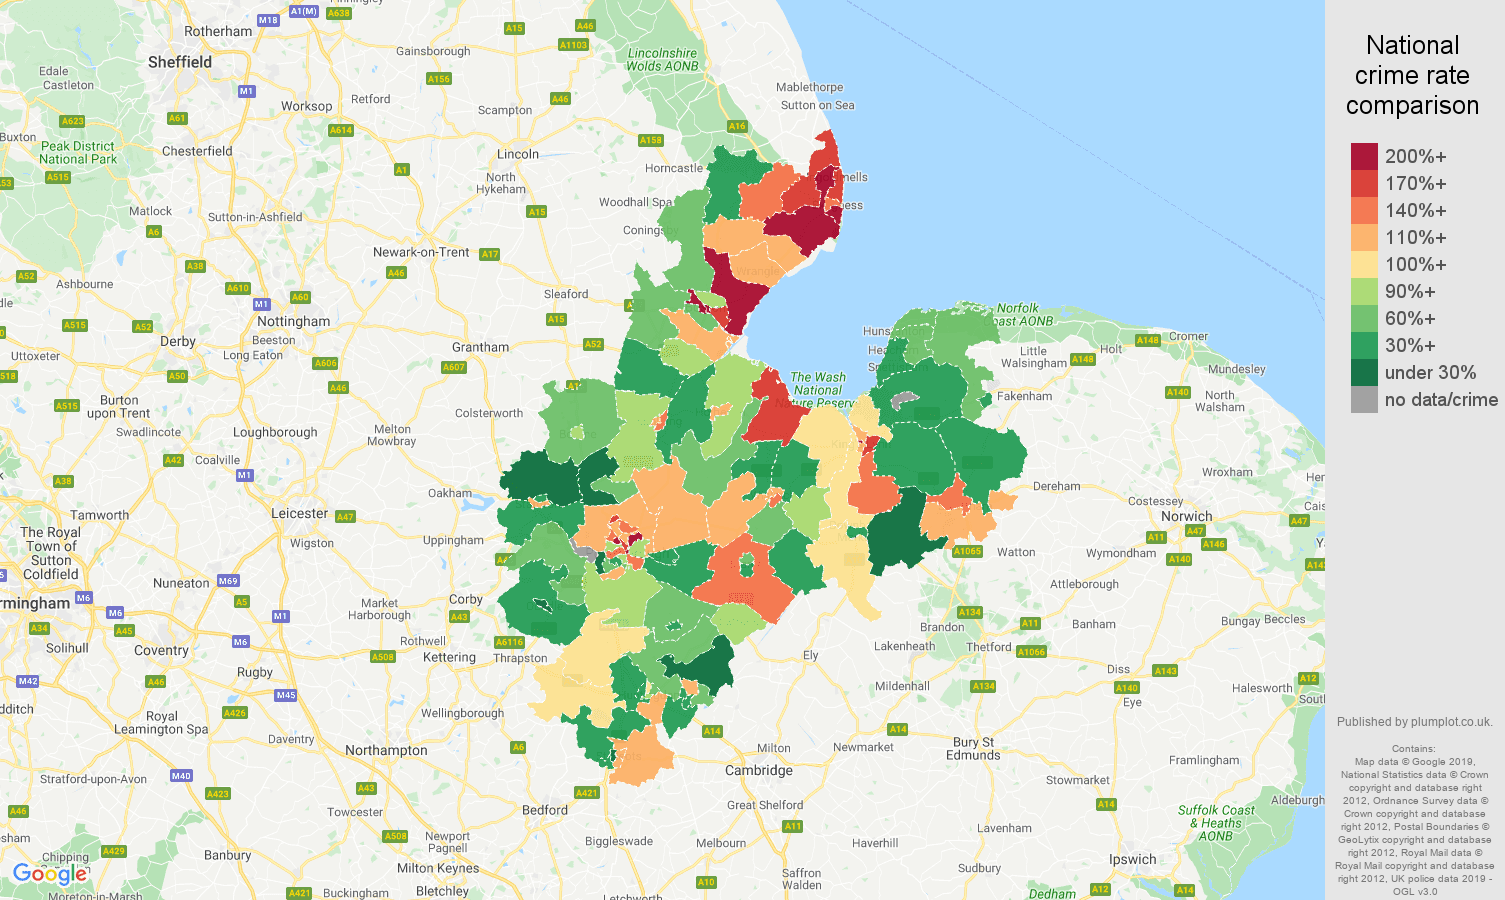 Peterborough other crime rate comparison map